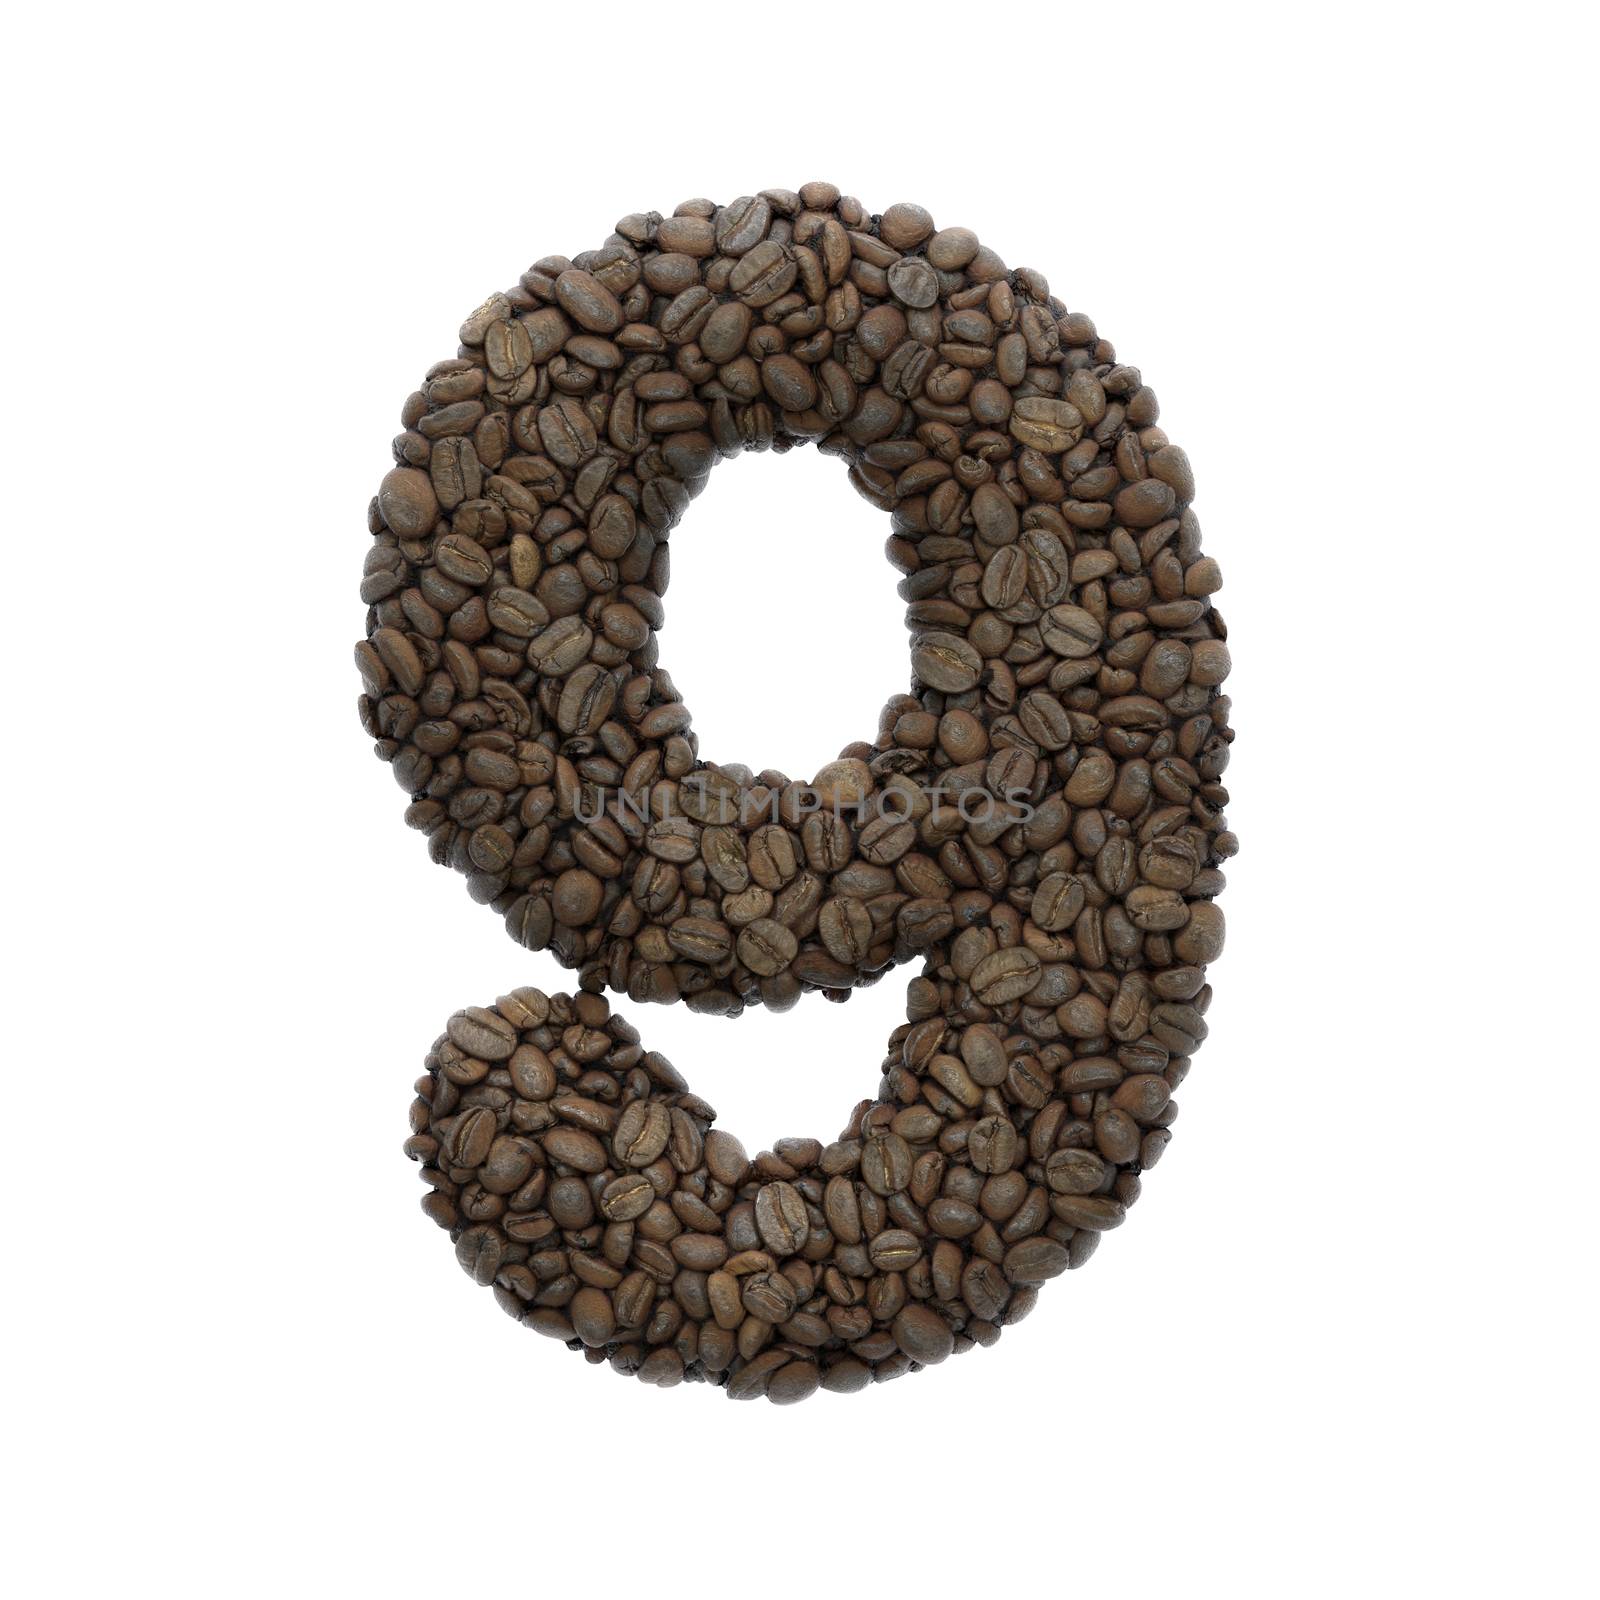 Coffee number 9 -  3d roasted beans digit - Suitable for Coffee, energy or insomnia related subjects by chrisroll